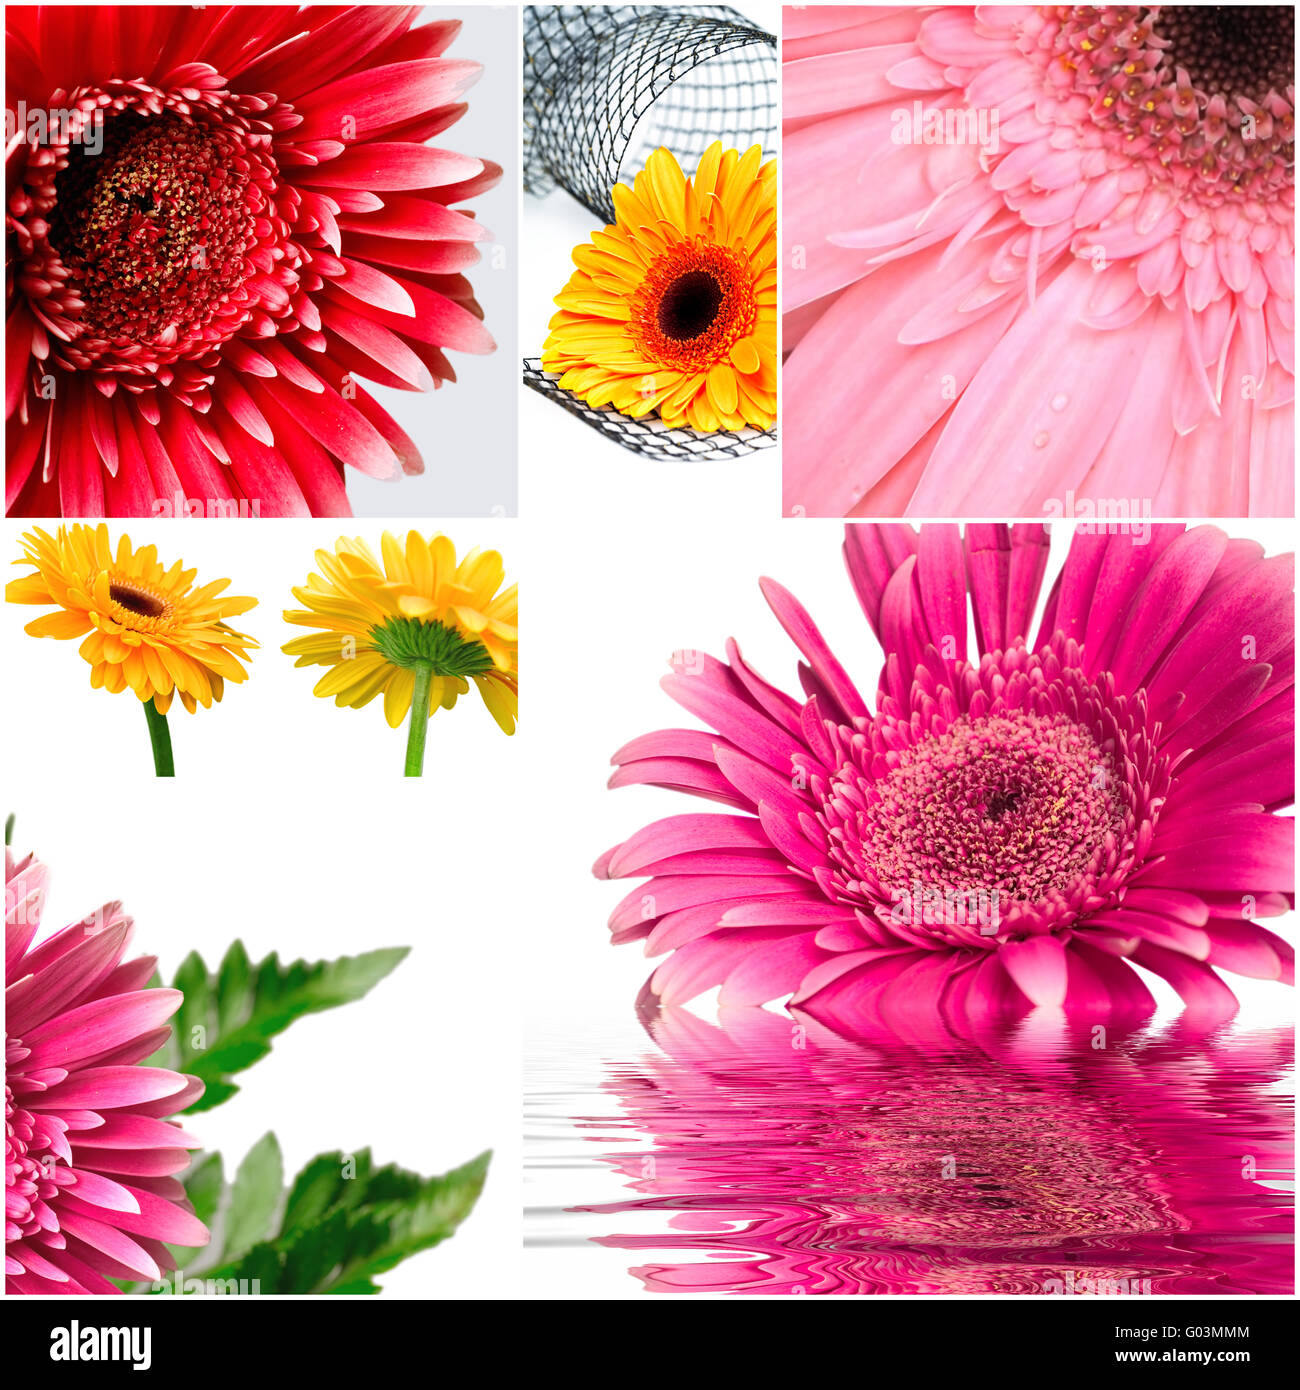 gerbera flowers of red and yellow colors on white Stock Photo